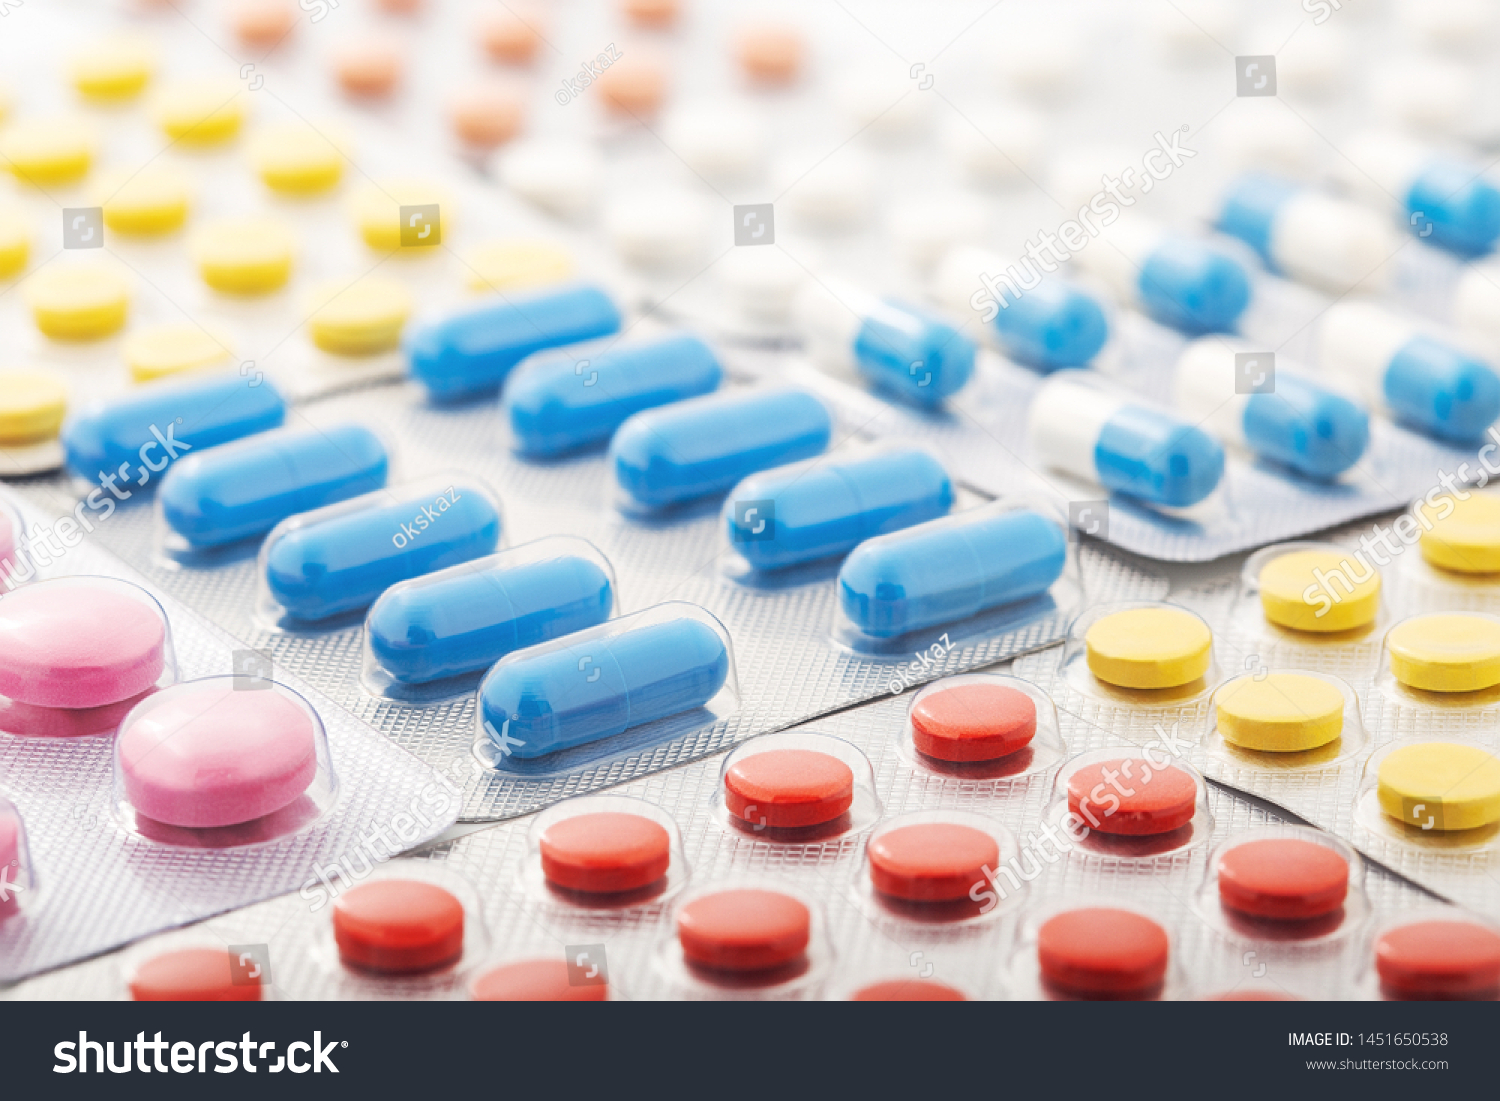 Heap of medical pills in white, blue and other colors. Pills in plastic package. Concept of healthcare and medicine. #1451650538